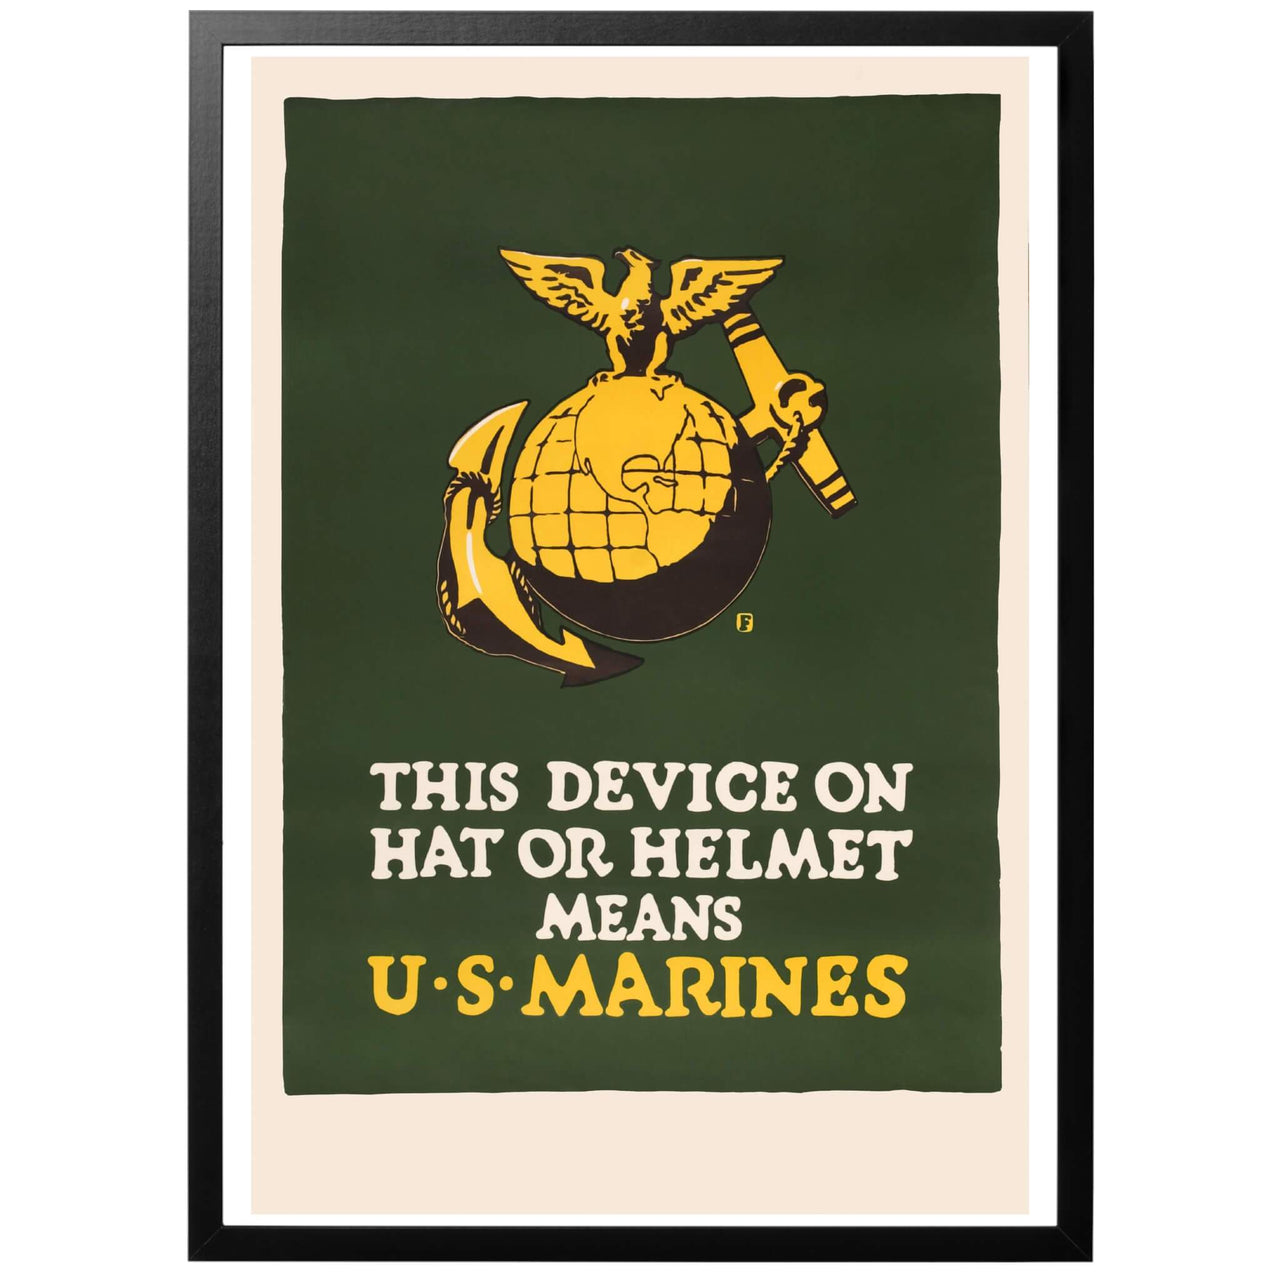 This device on hat or helmet means U.S. Marines Poster